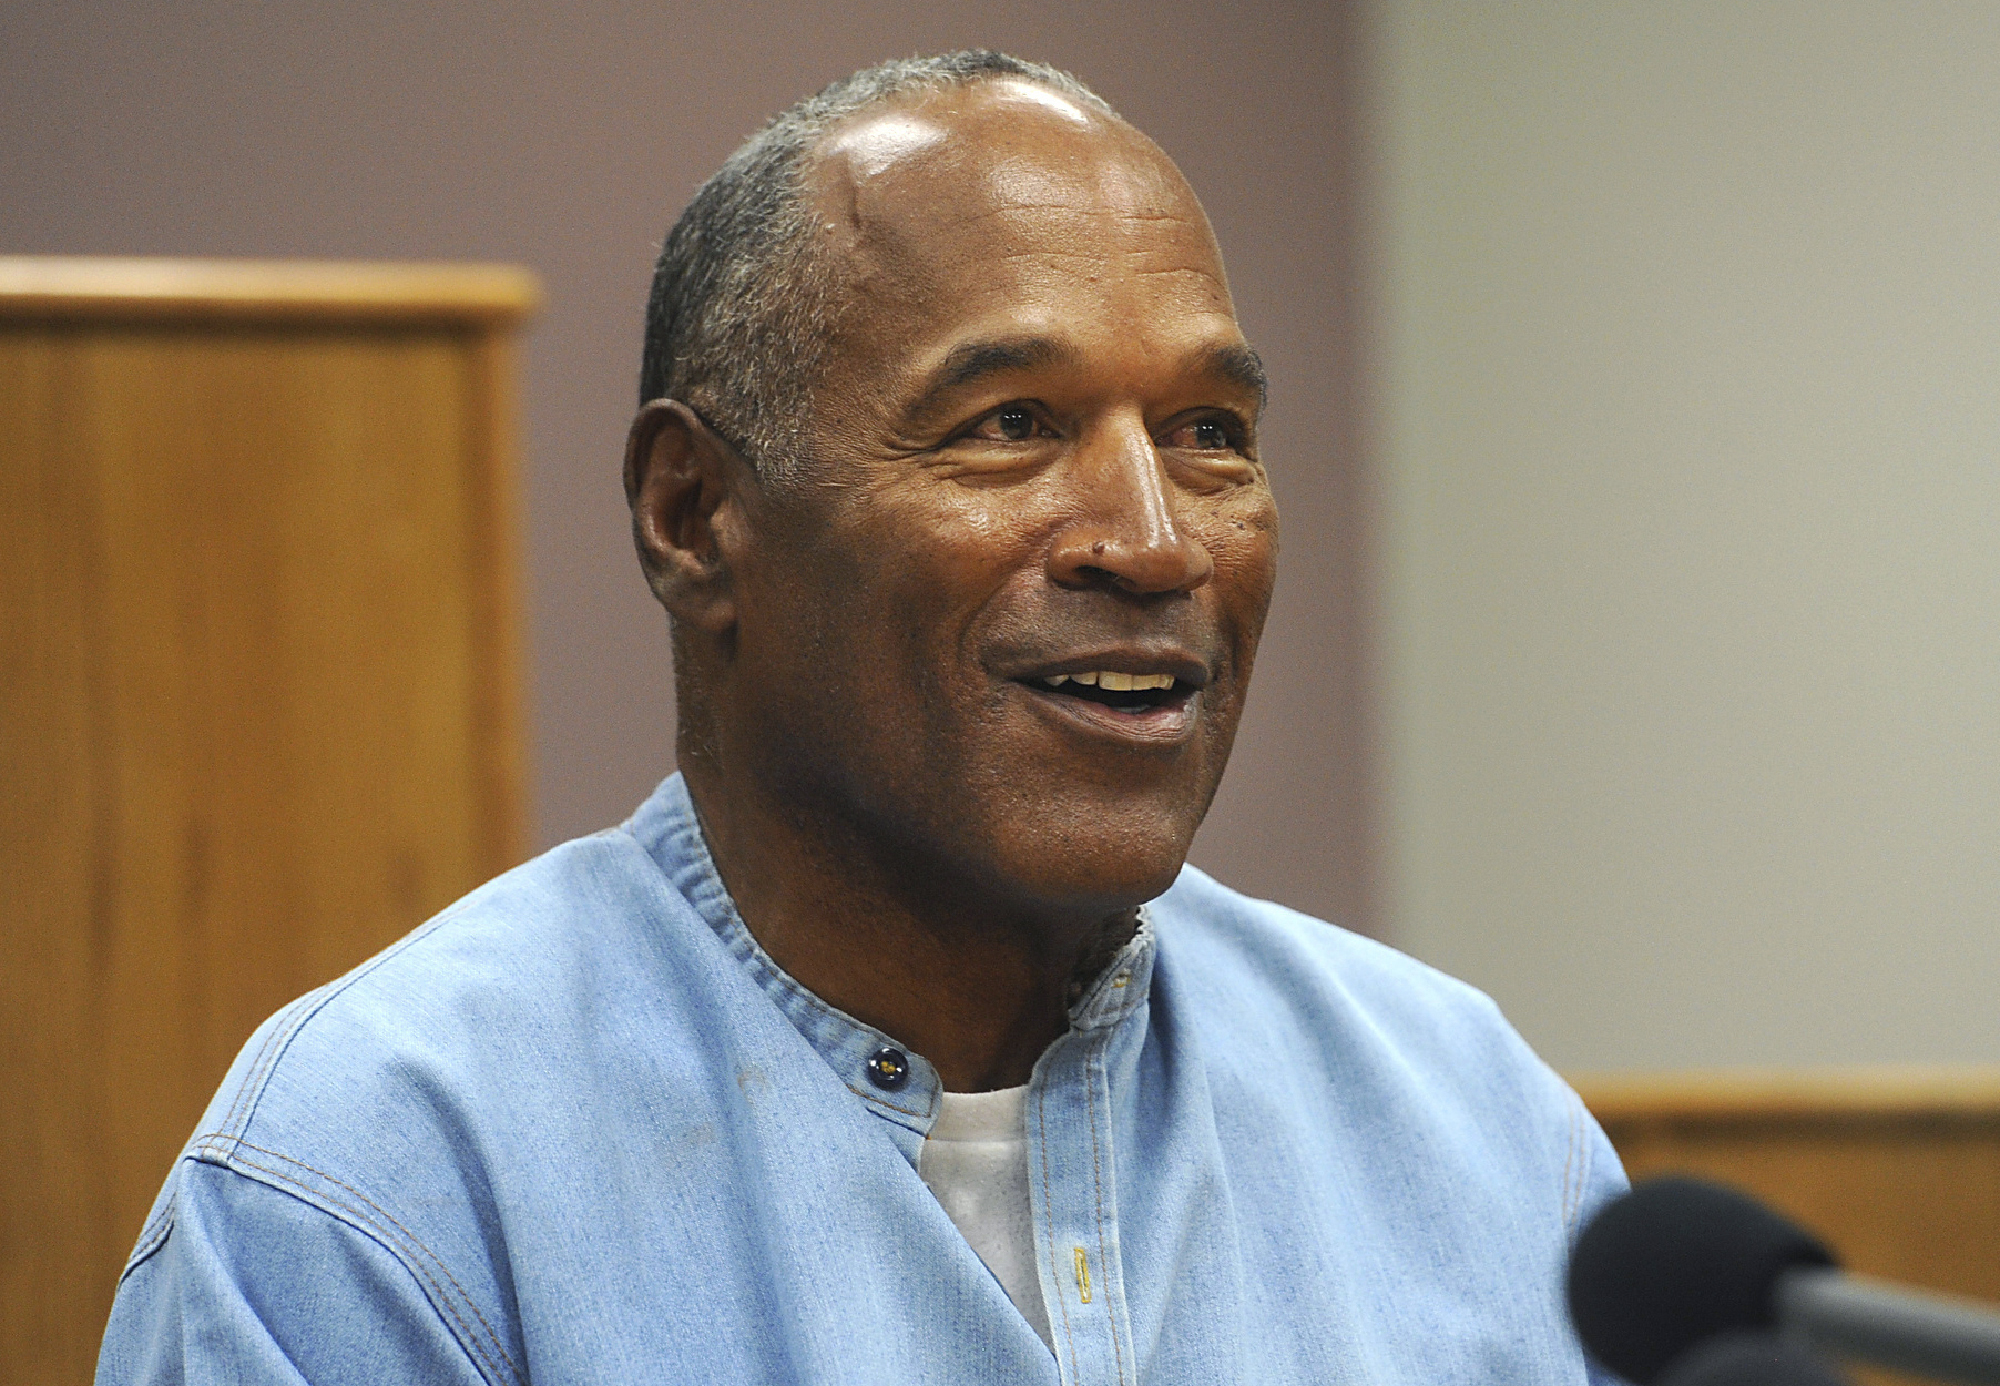 O.J. Simpson Dies at 76 From Cancer – Analyzing His Legacy